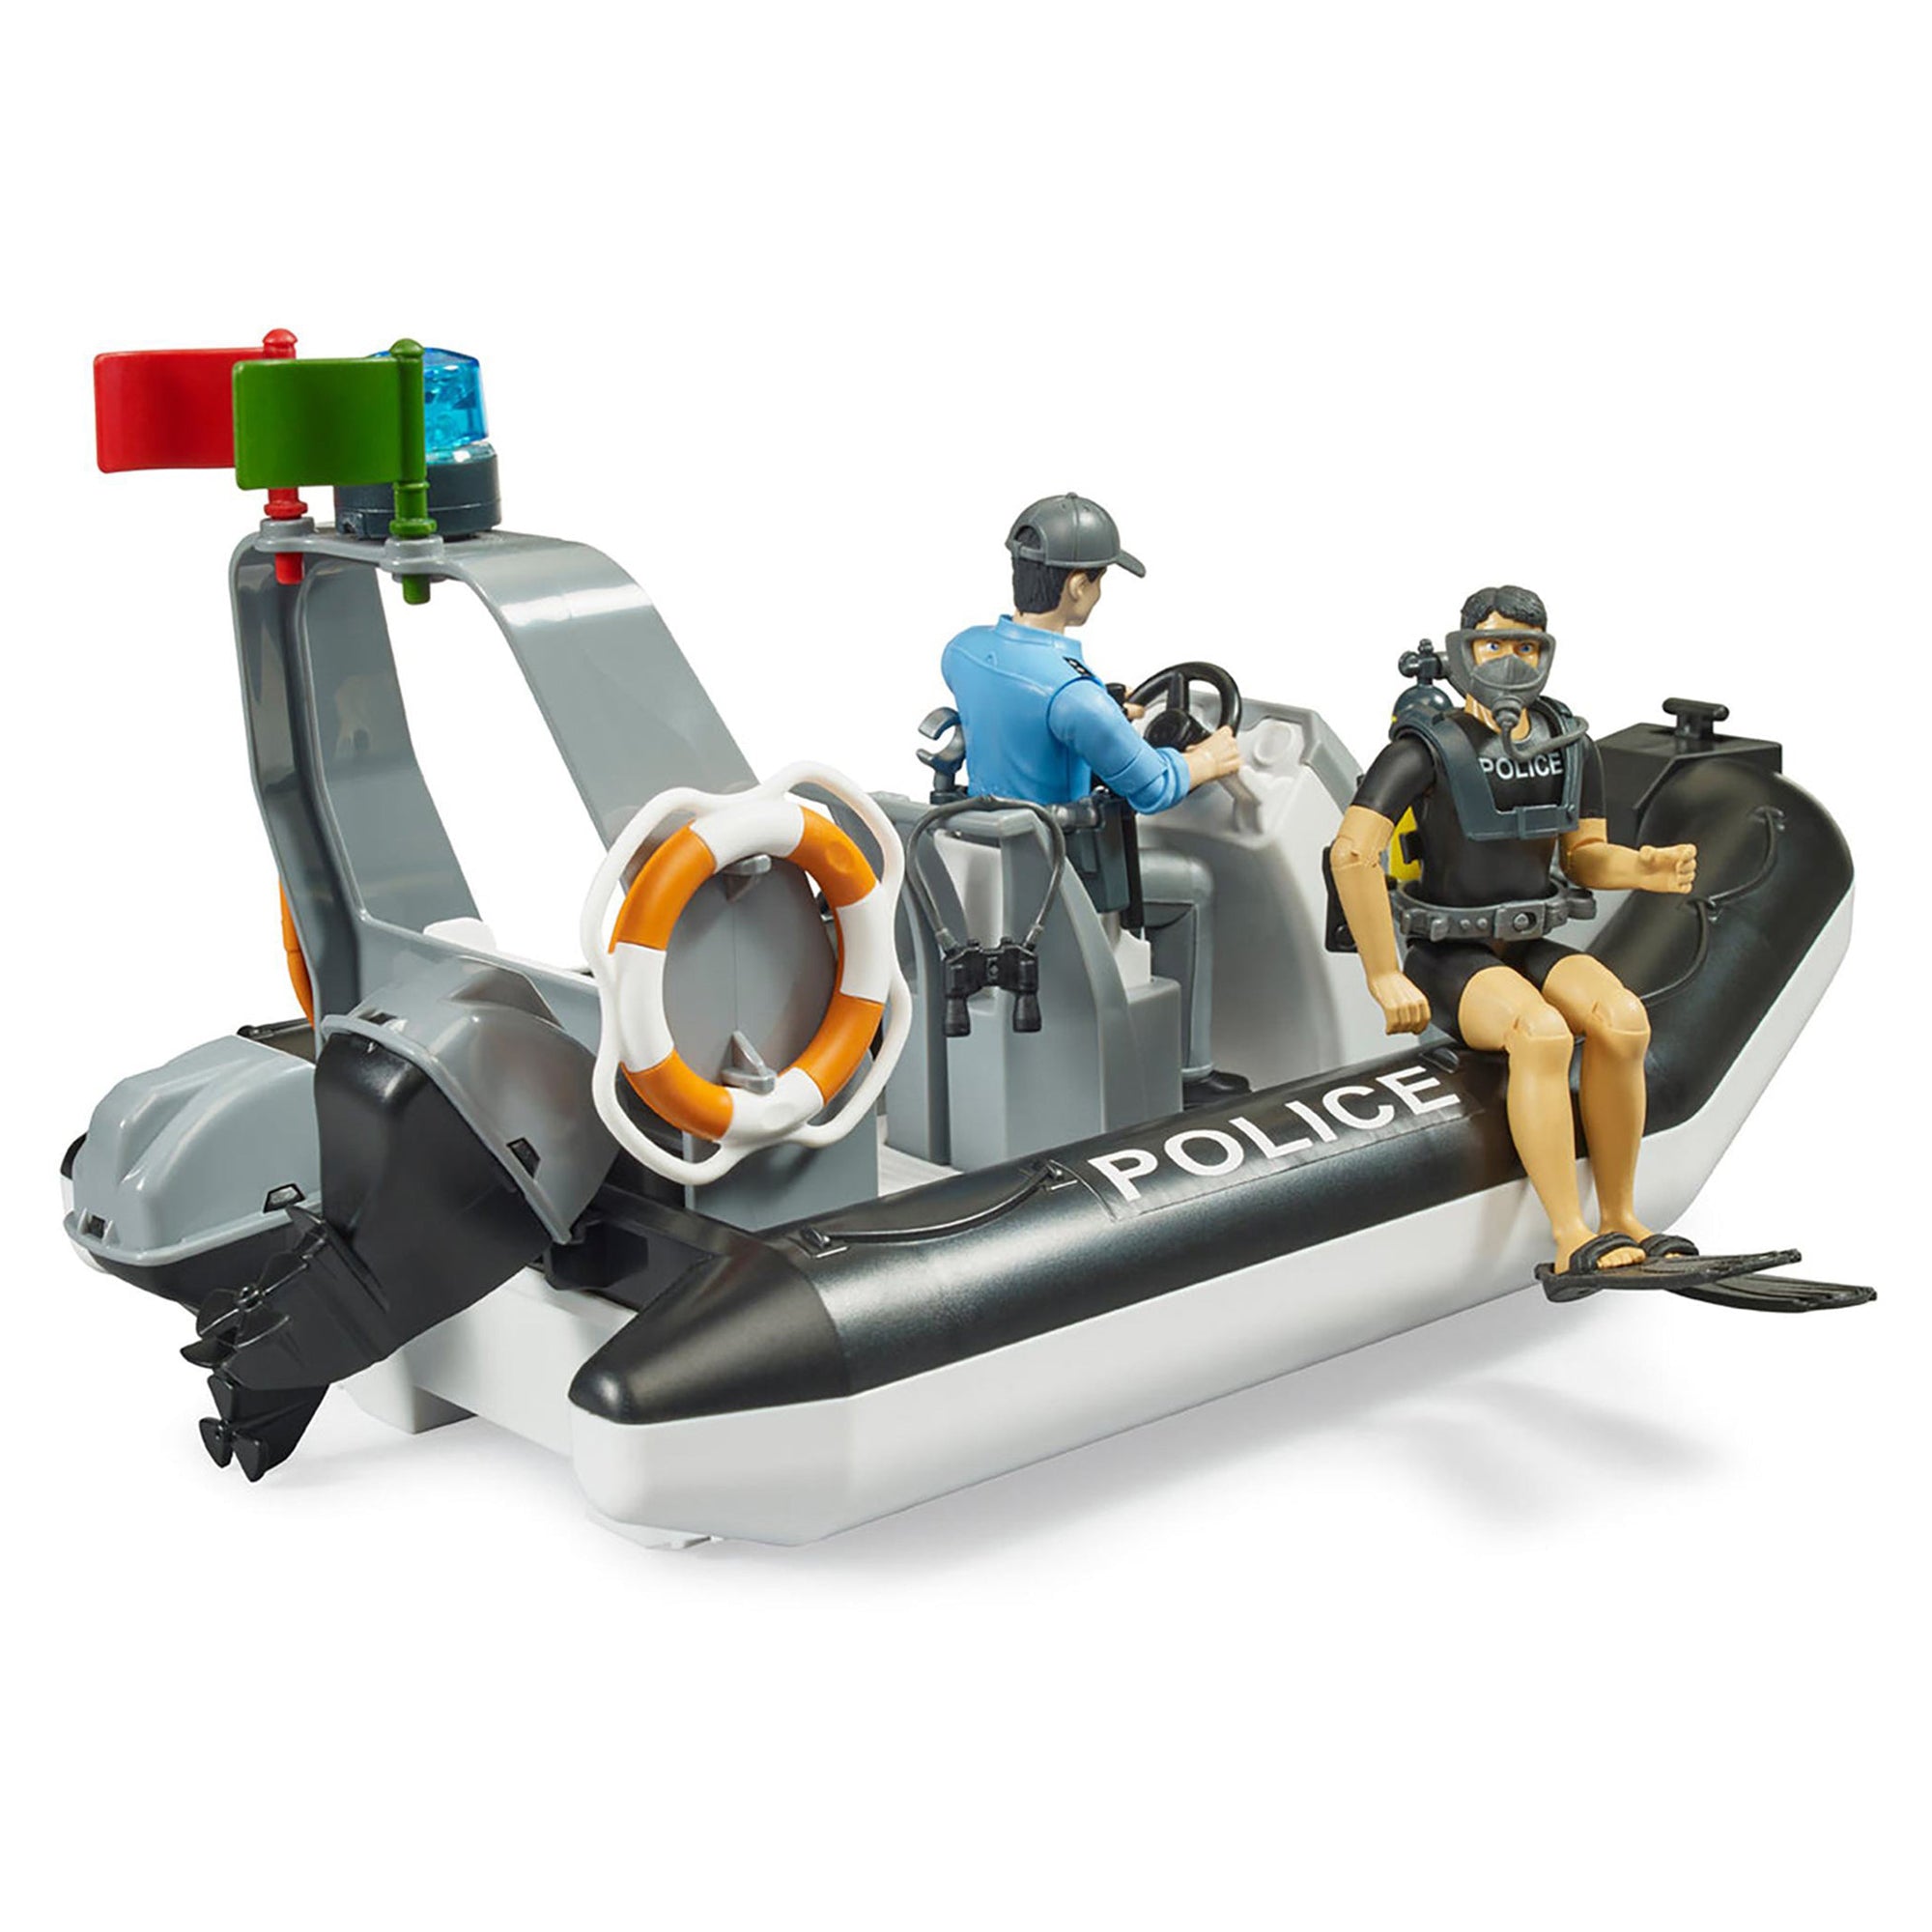 Bruder 1:16 Bworld Police Boat with Figures, Beacon & Accessories